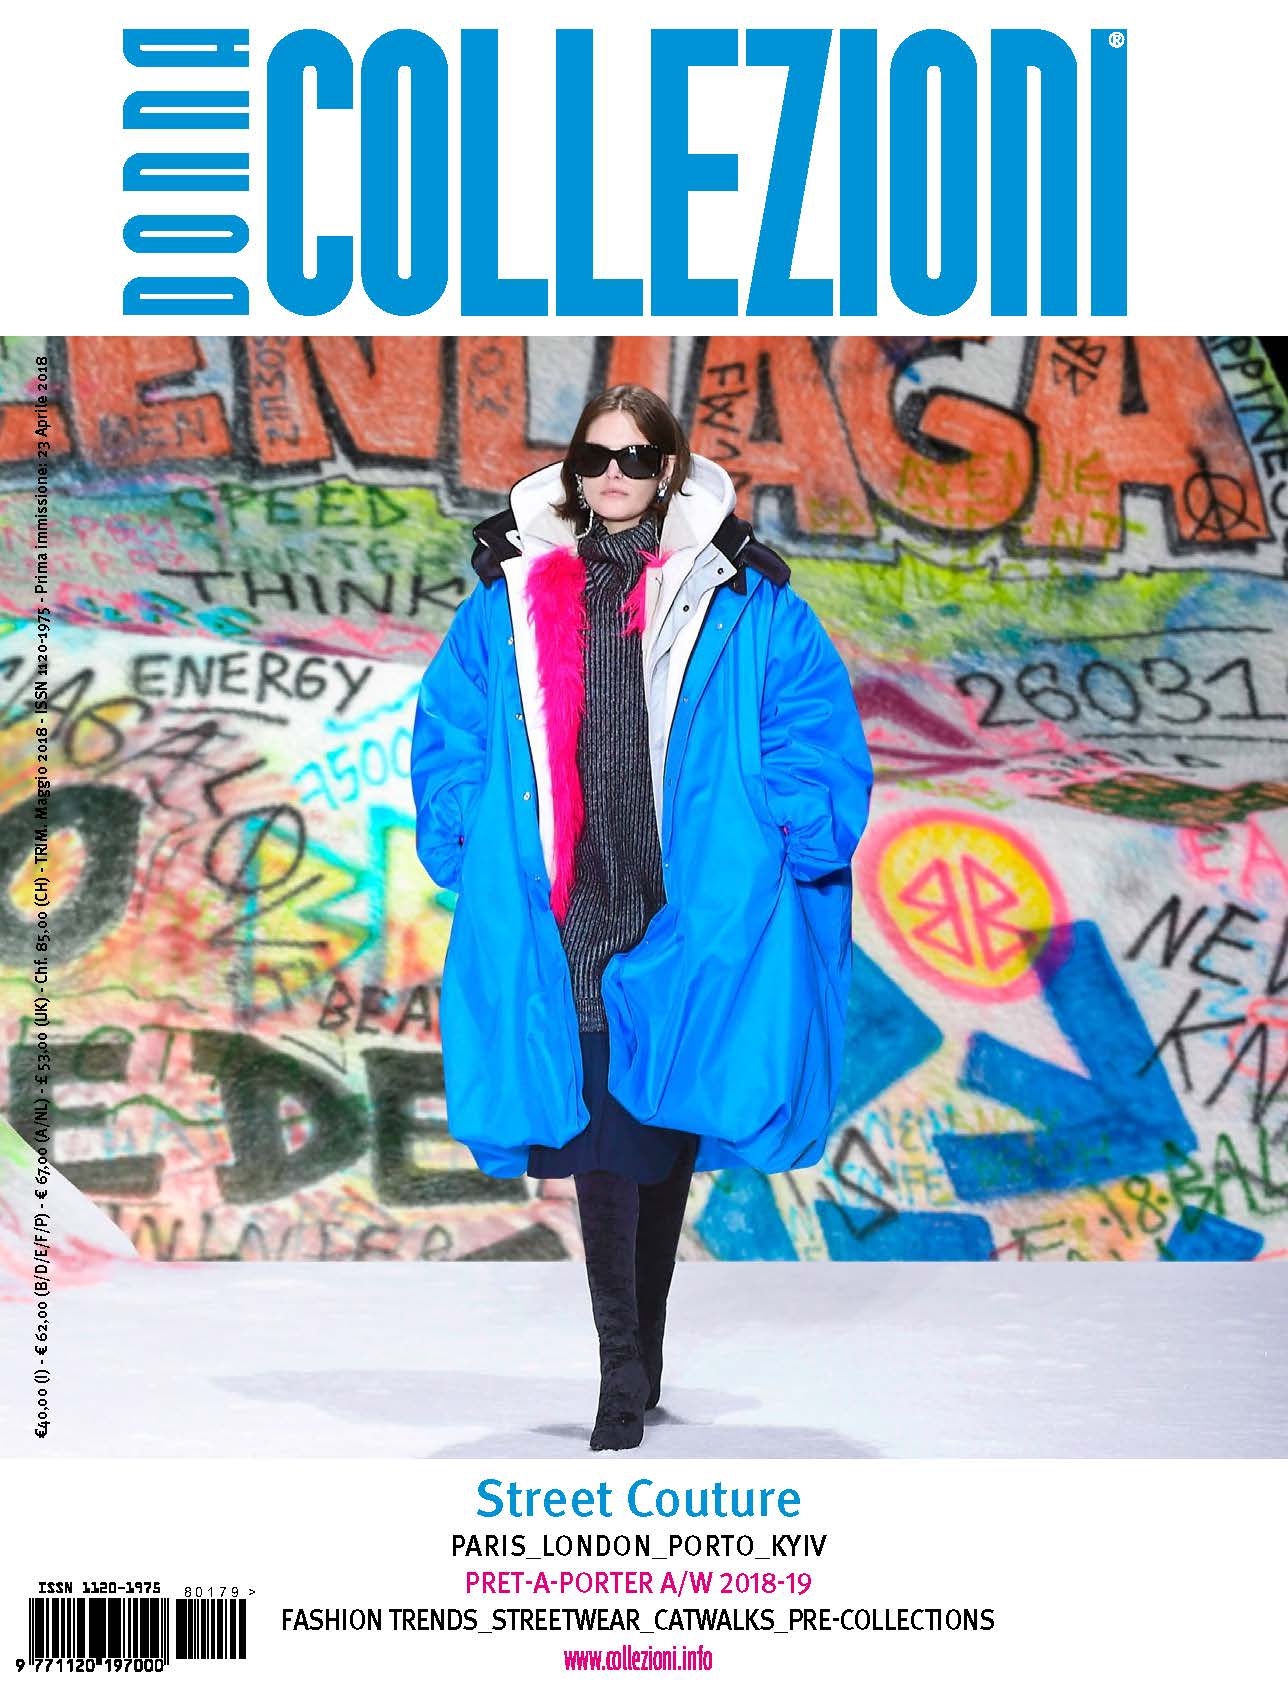 COVER CL 178